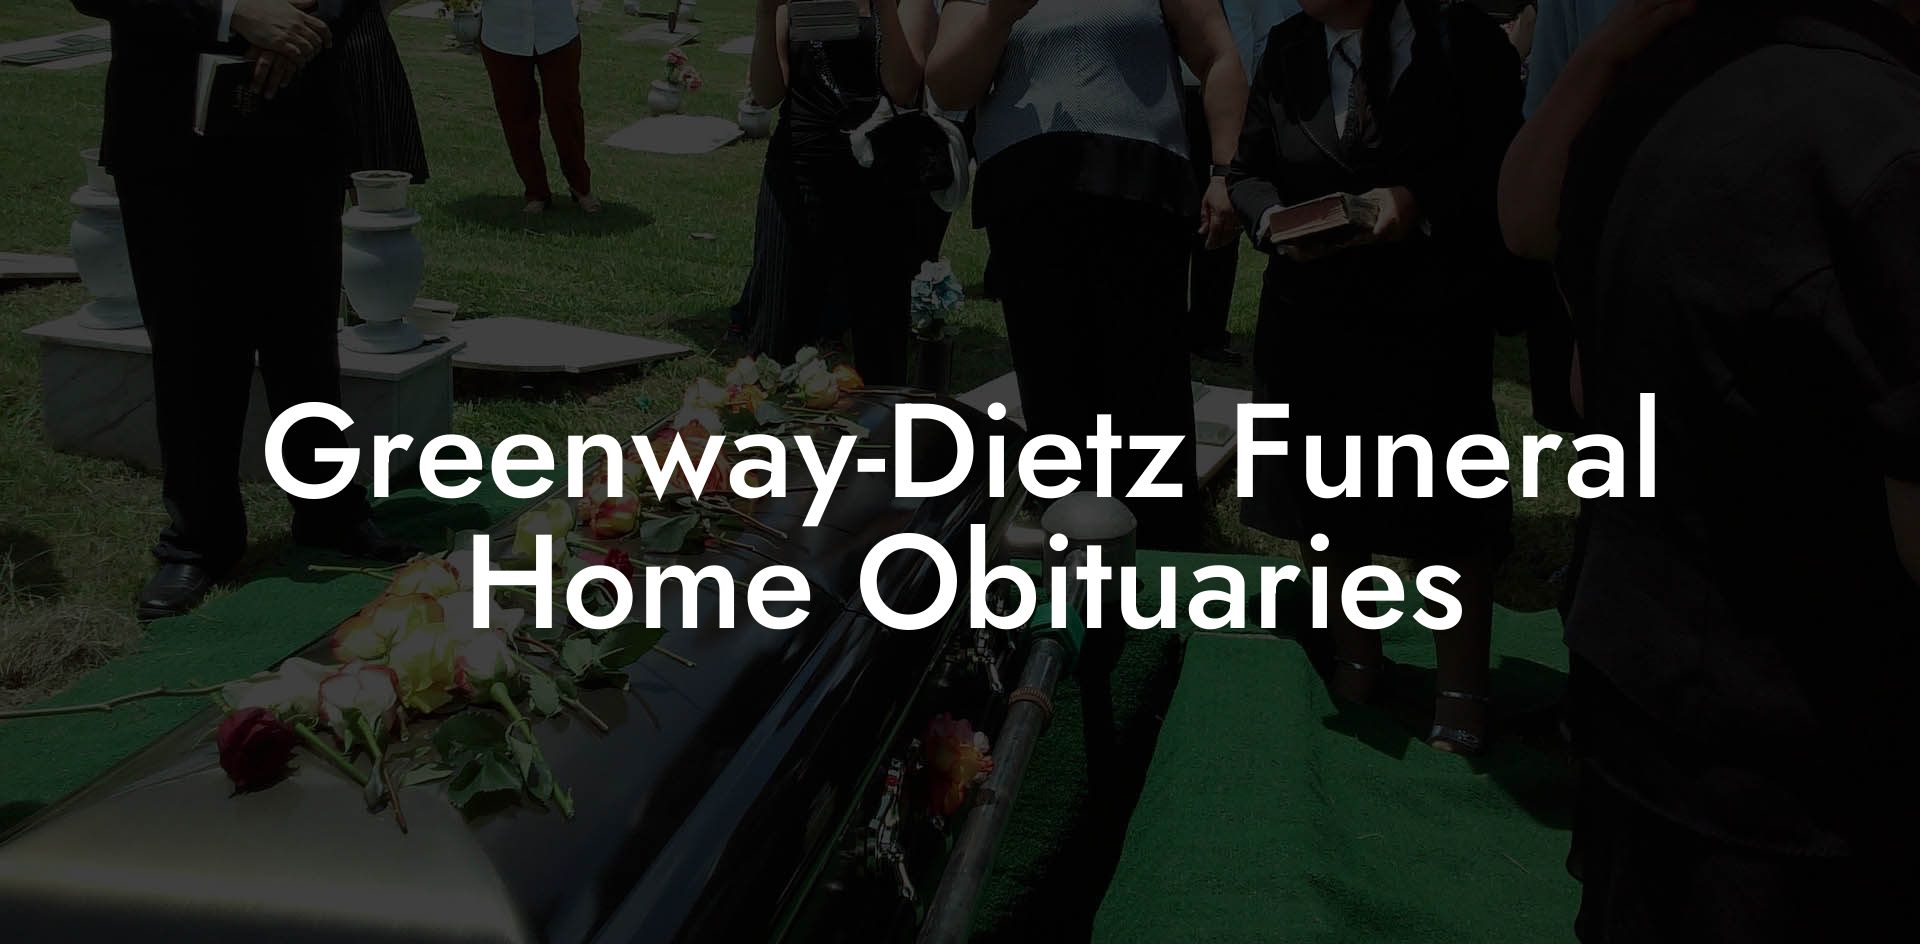 Greenway-Dietz Funeral Home Obituaries